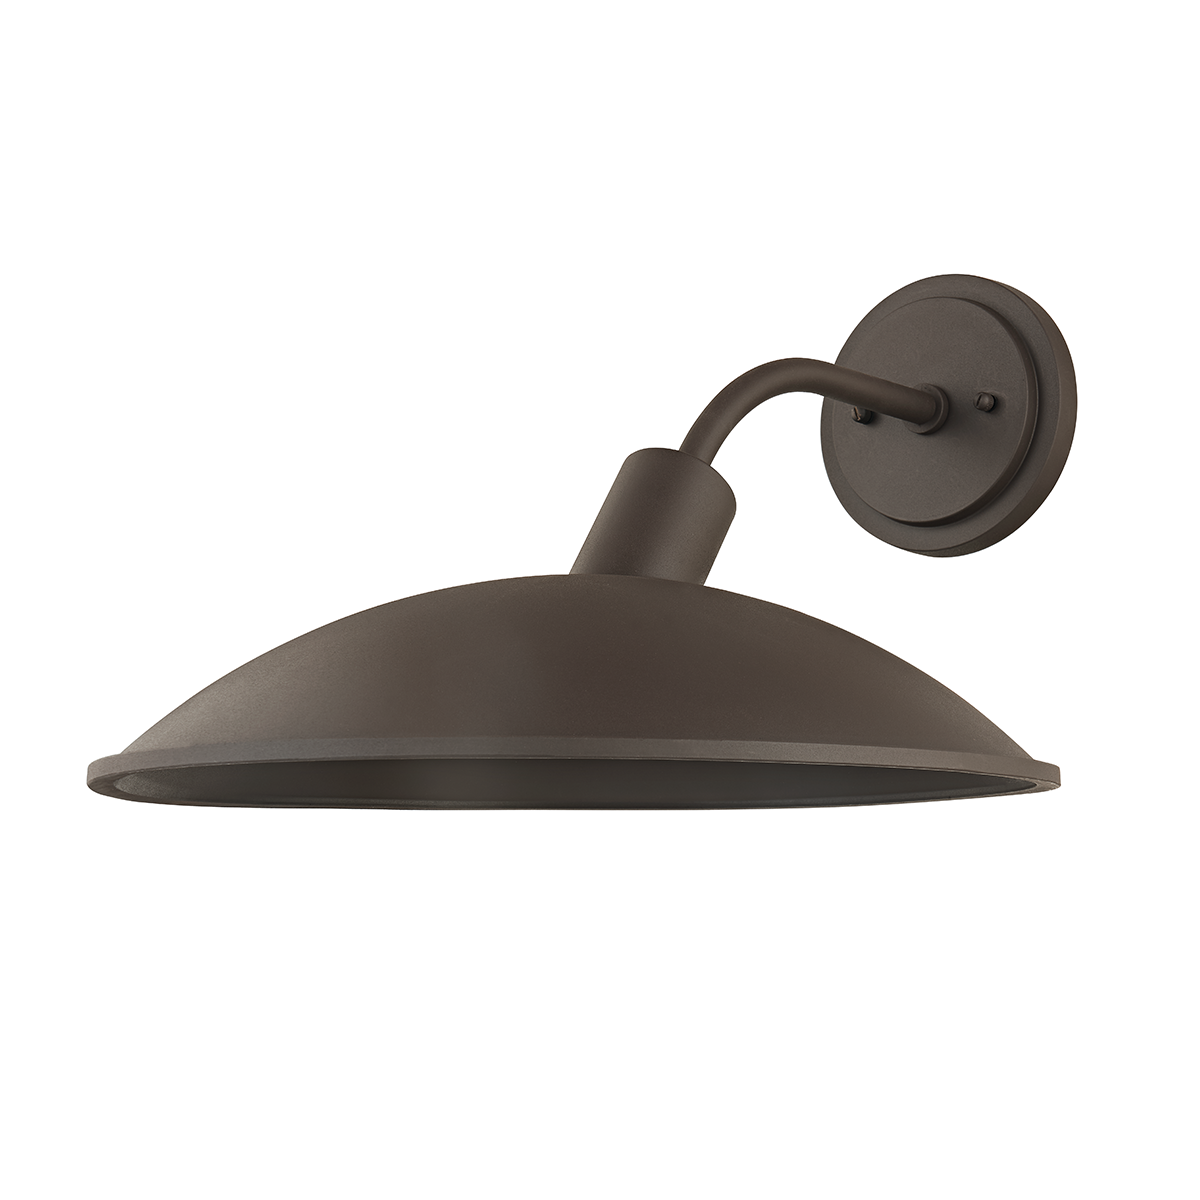 Troy Lighting 1 LIGHT LARGE EXTERIOR WALL SCONCE B8816 Outdoor l Wall Troy Lighting TEXTURED BRONZE  